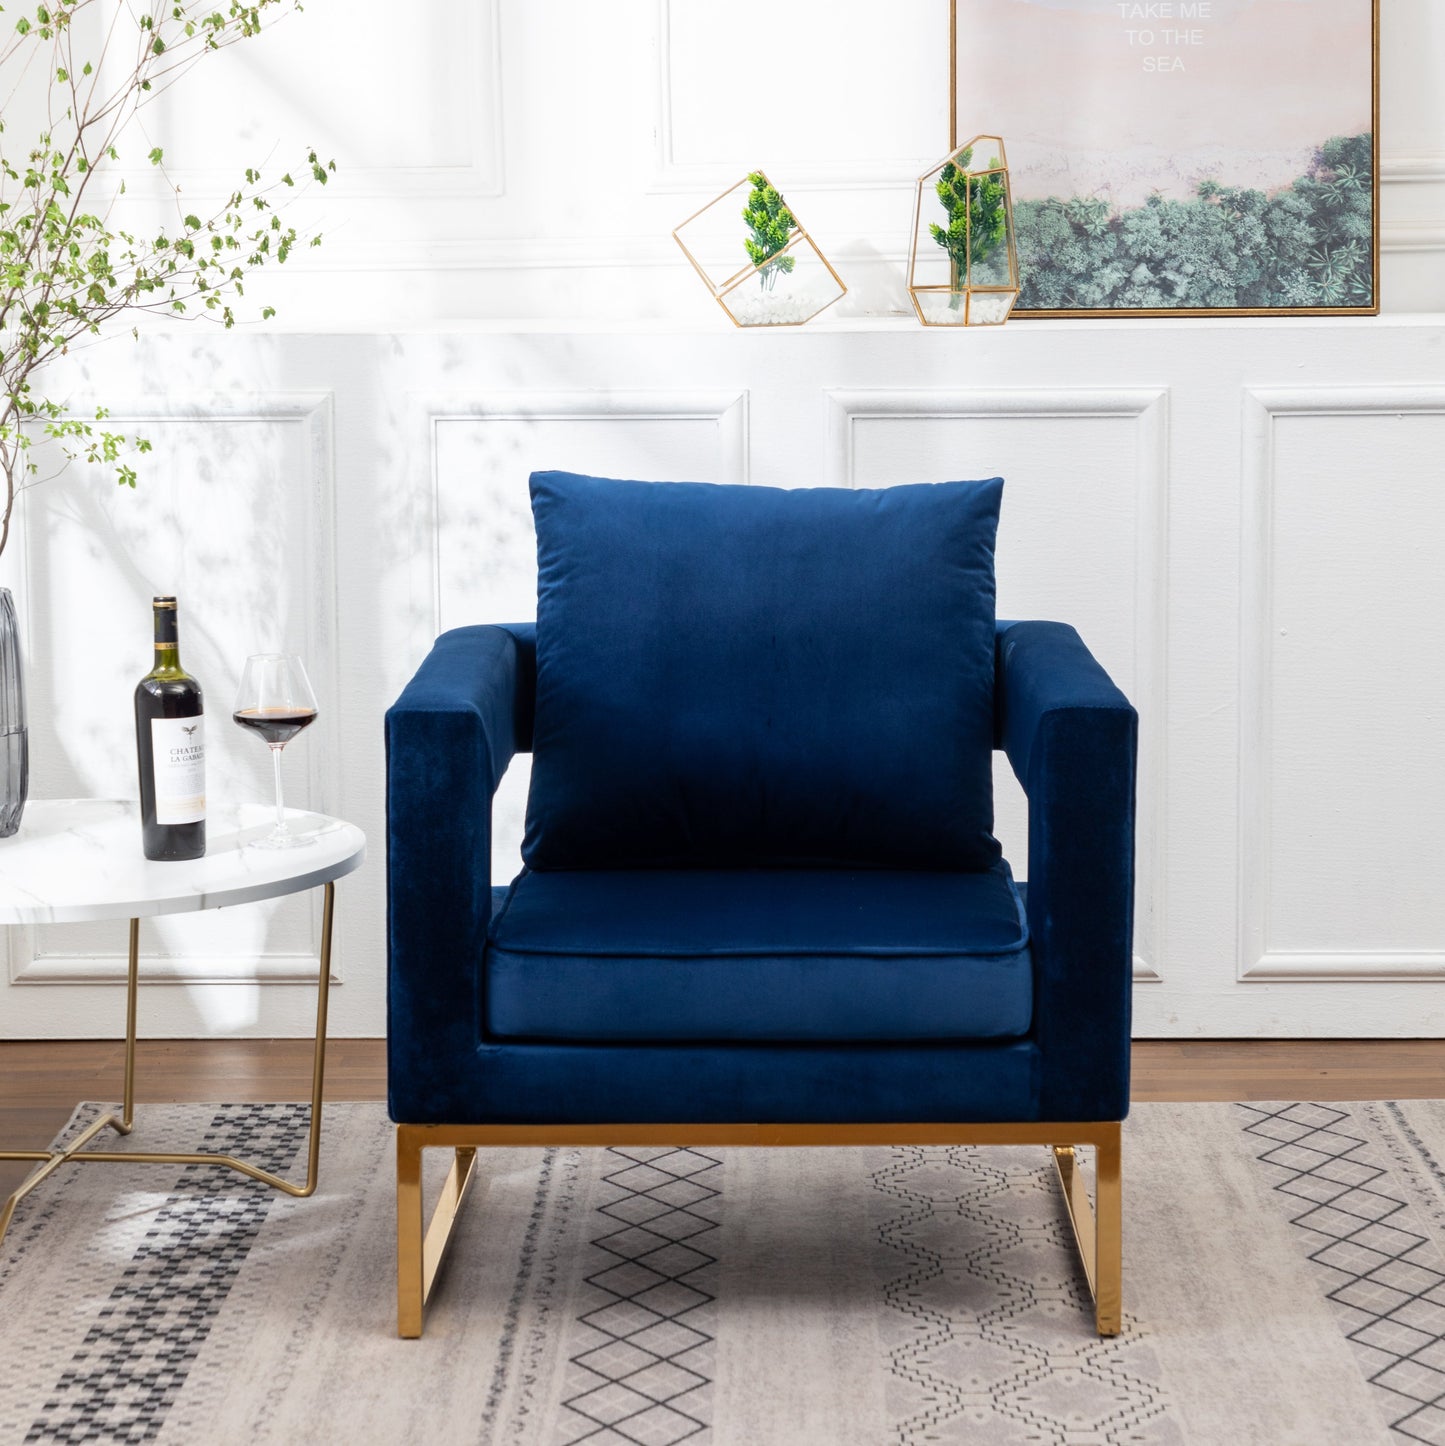 Lenola Contemporary Upholstered Accent Arm Chair, Blue